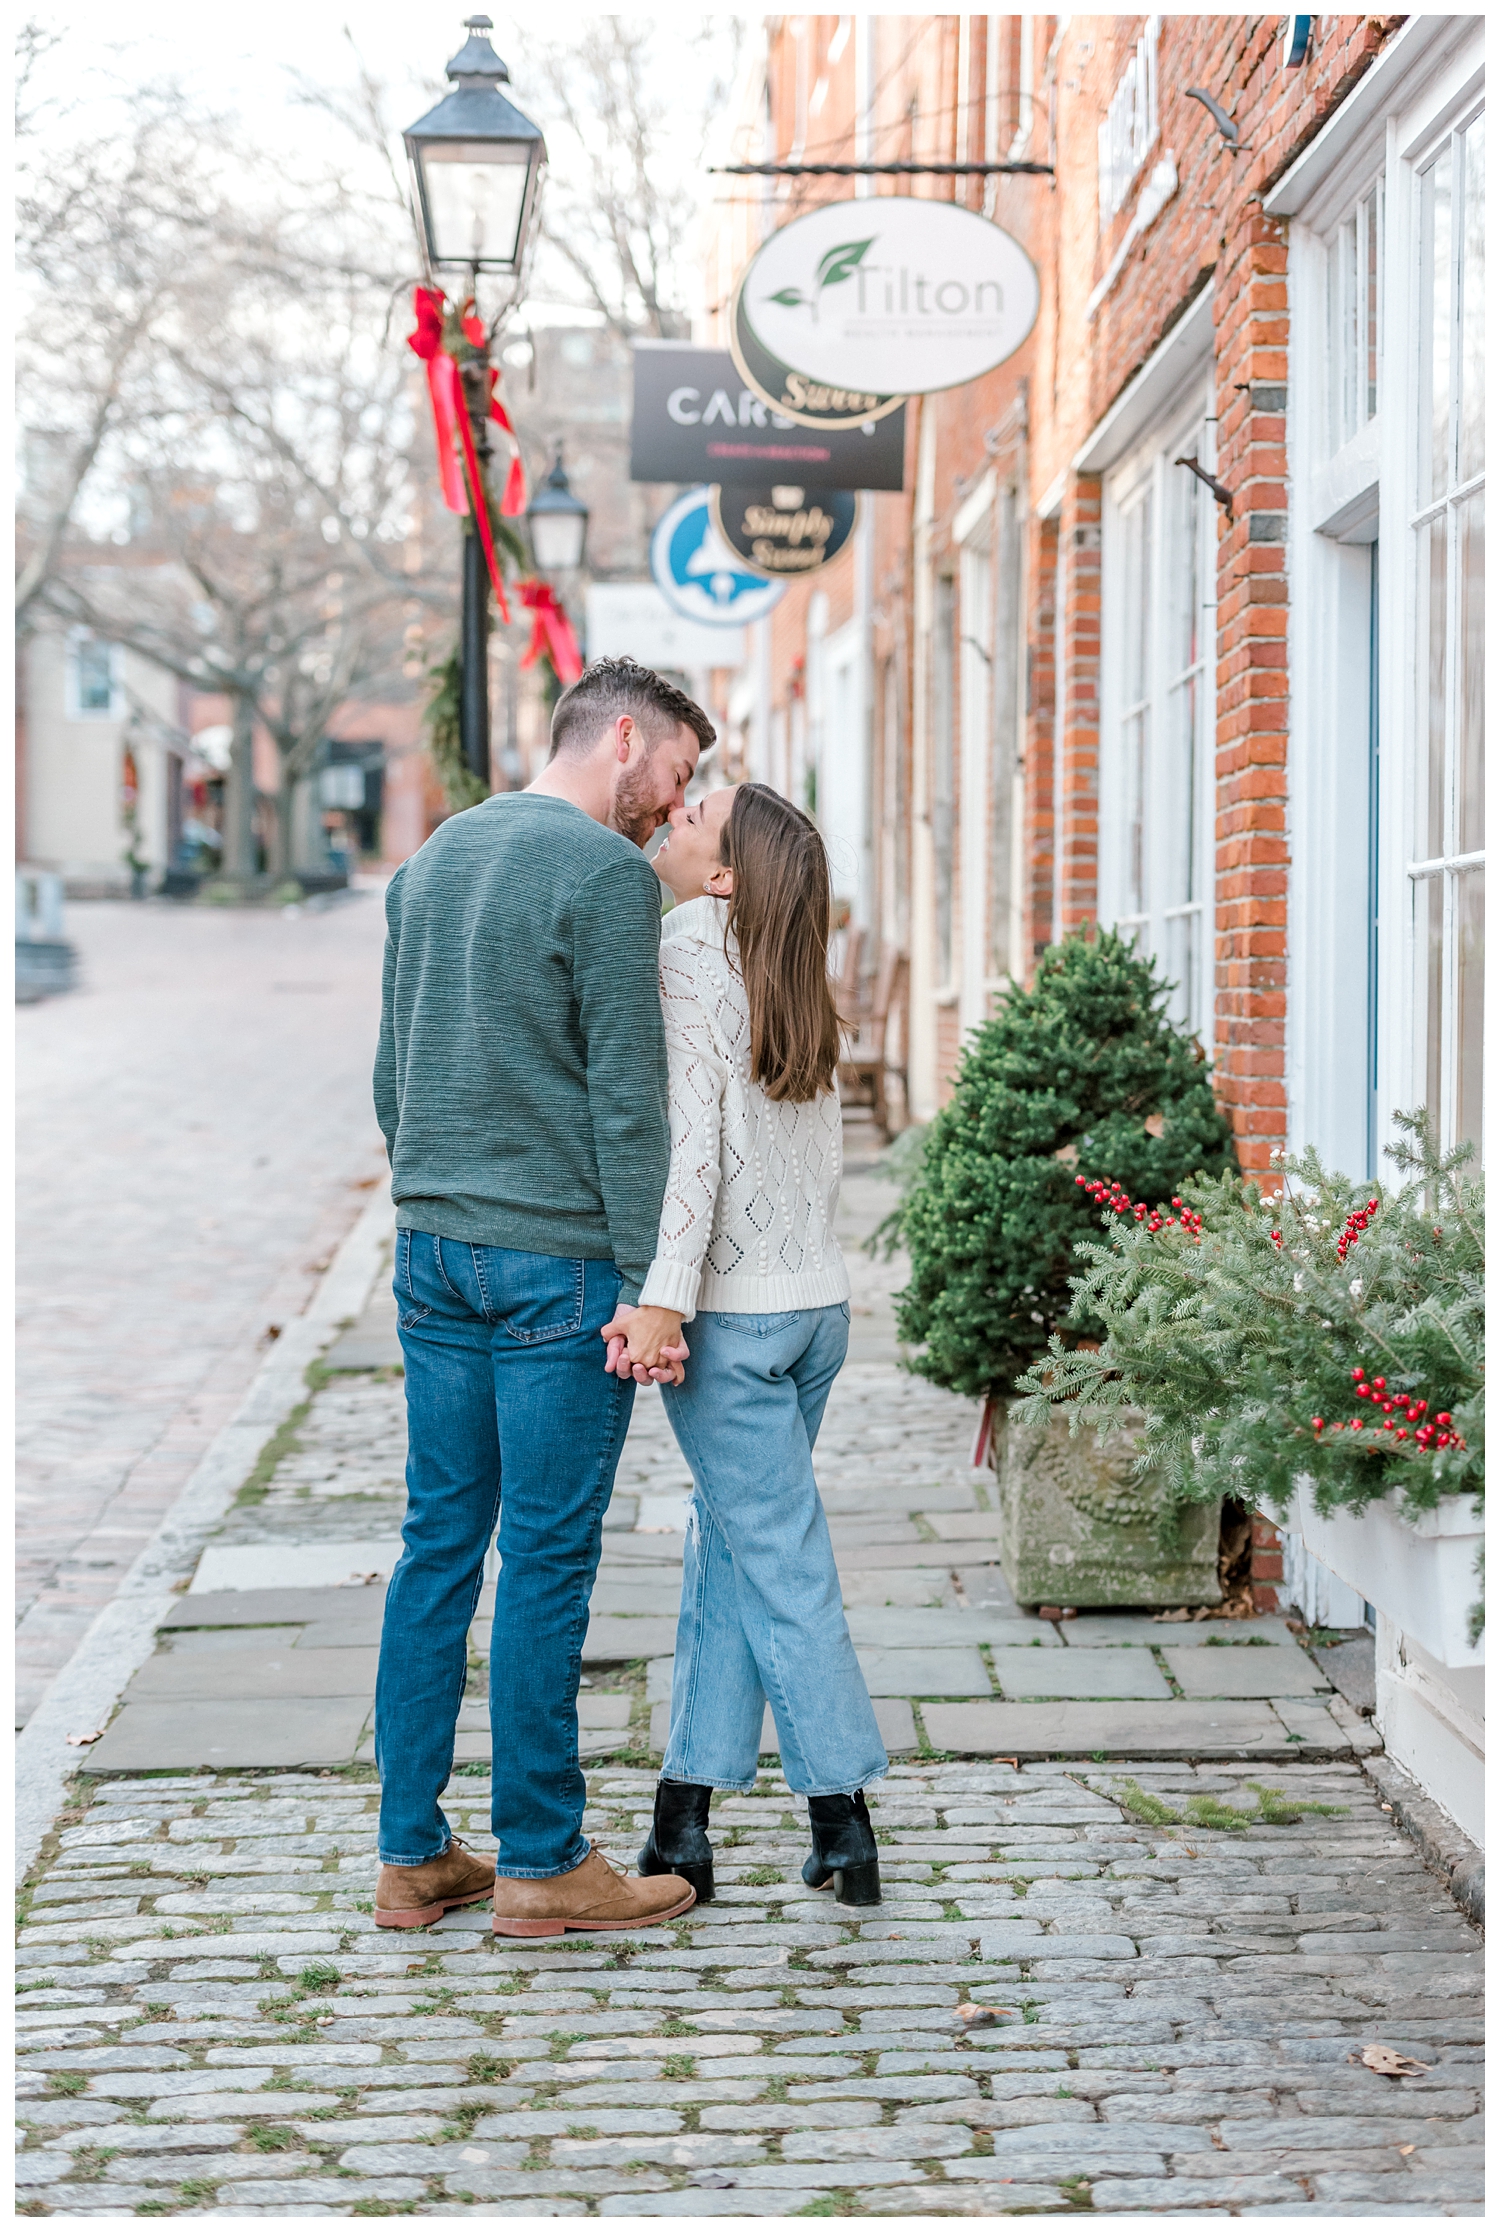 Christmas themed engagement photos